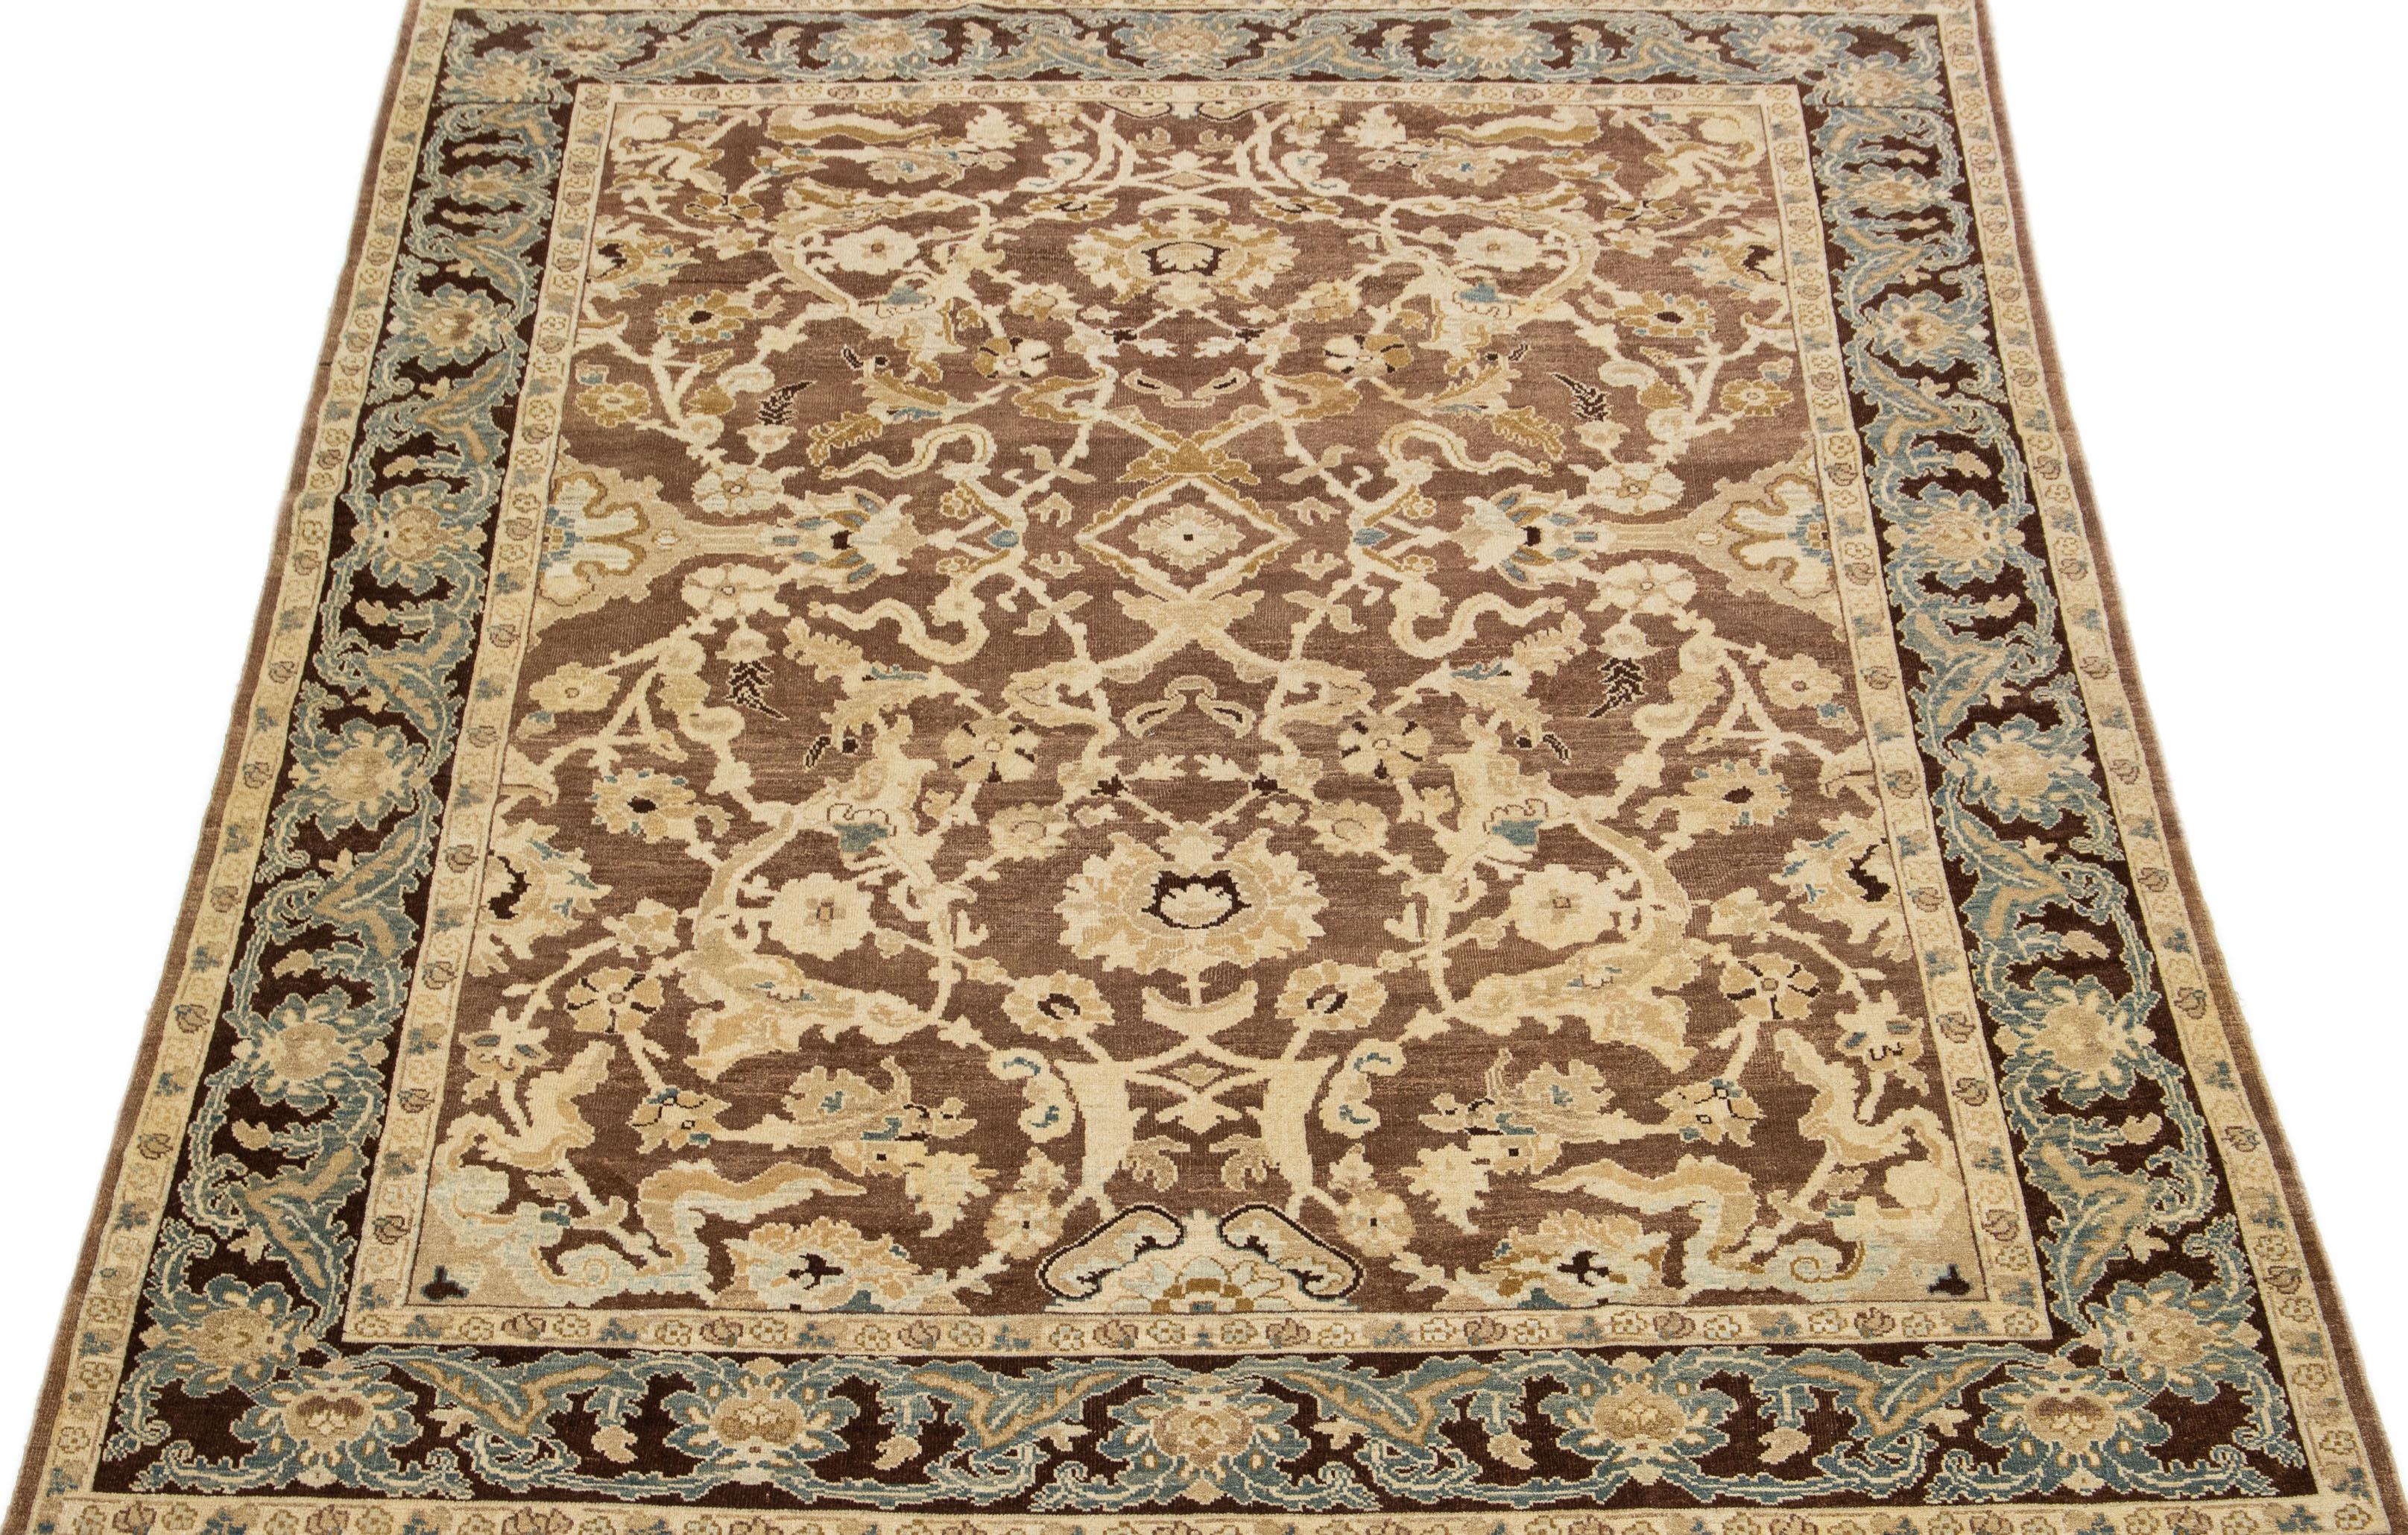 Beautiful modern room-size Sultanabad hand-knotted wool rug with a brown color field. This rug has a designed frame with beige and blue accents in a gorgeous all-over floral motif.

This rug measures 8' x 10'.

Our rugs are professional cleaning